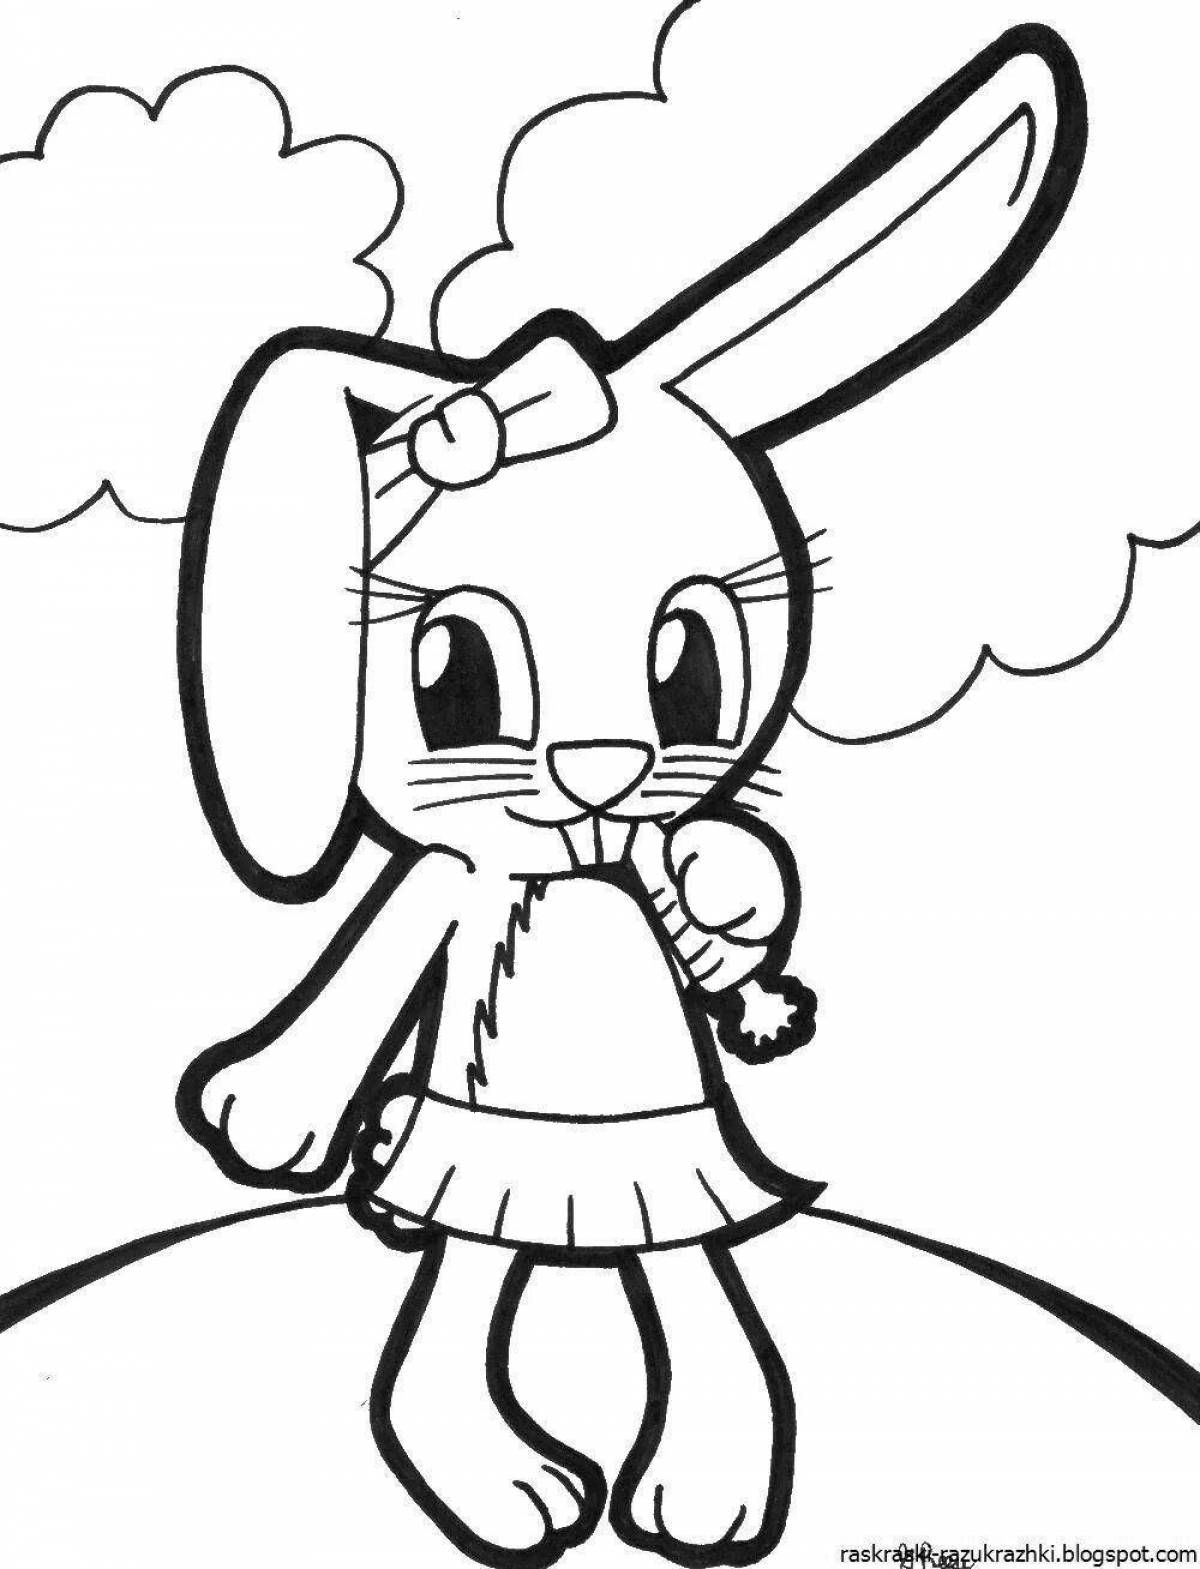 Great coloring bunny in a dress